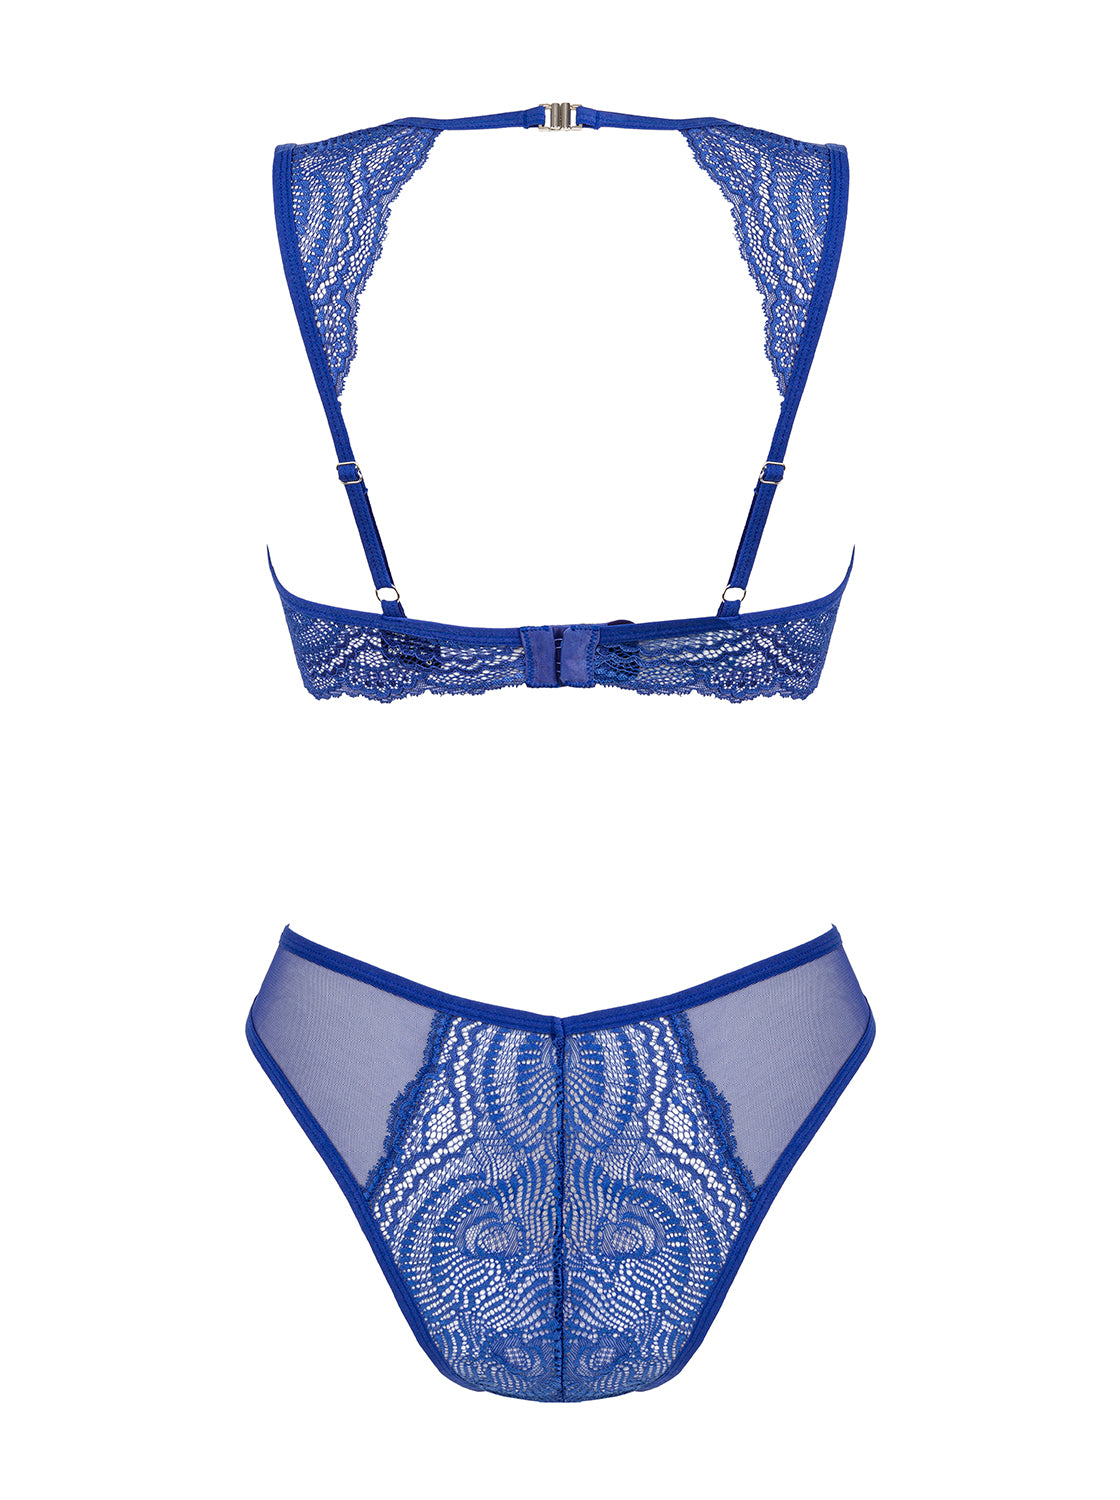 Giselia fantastic set made of delicately translucent and elastic material in blue with elegant lace elements